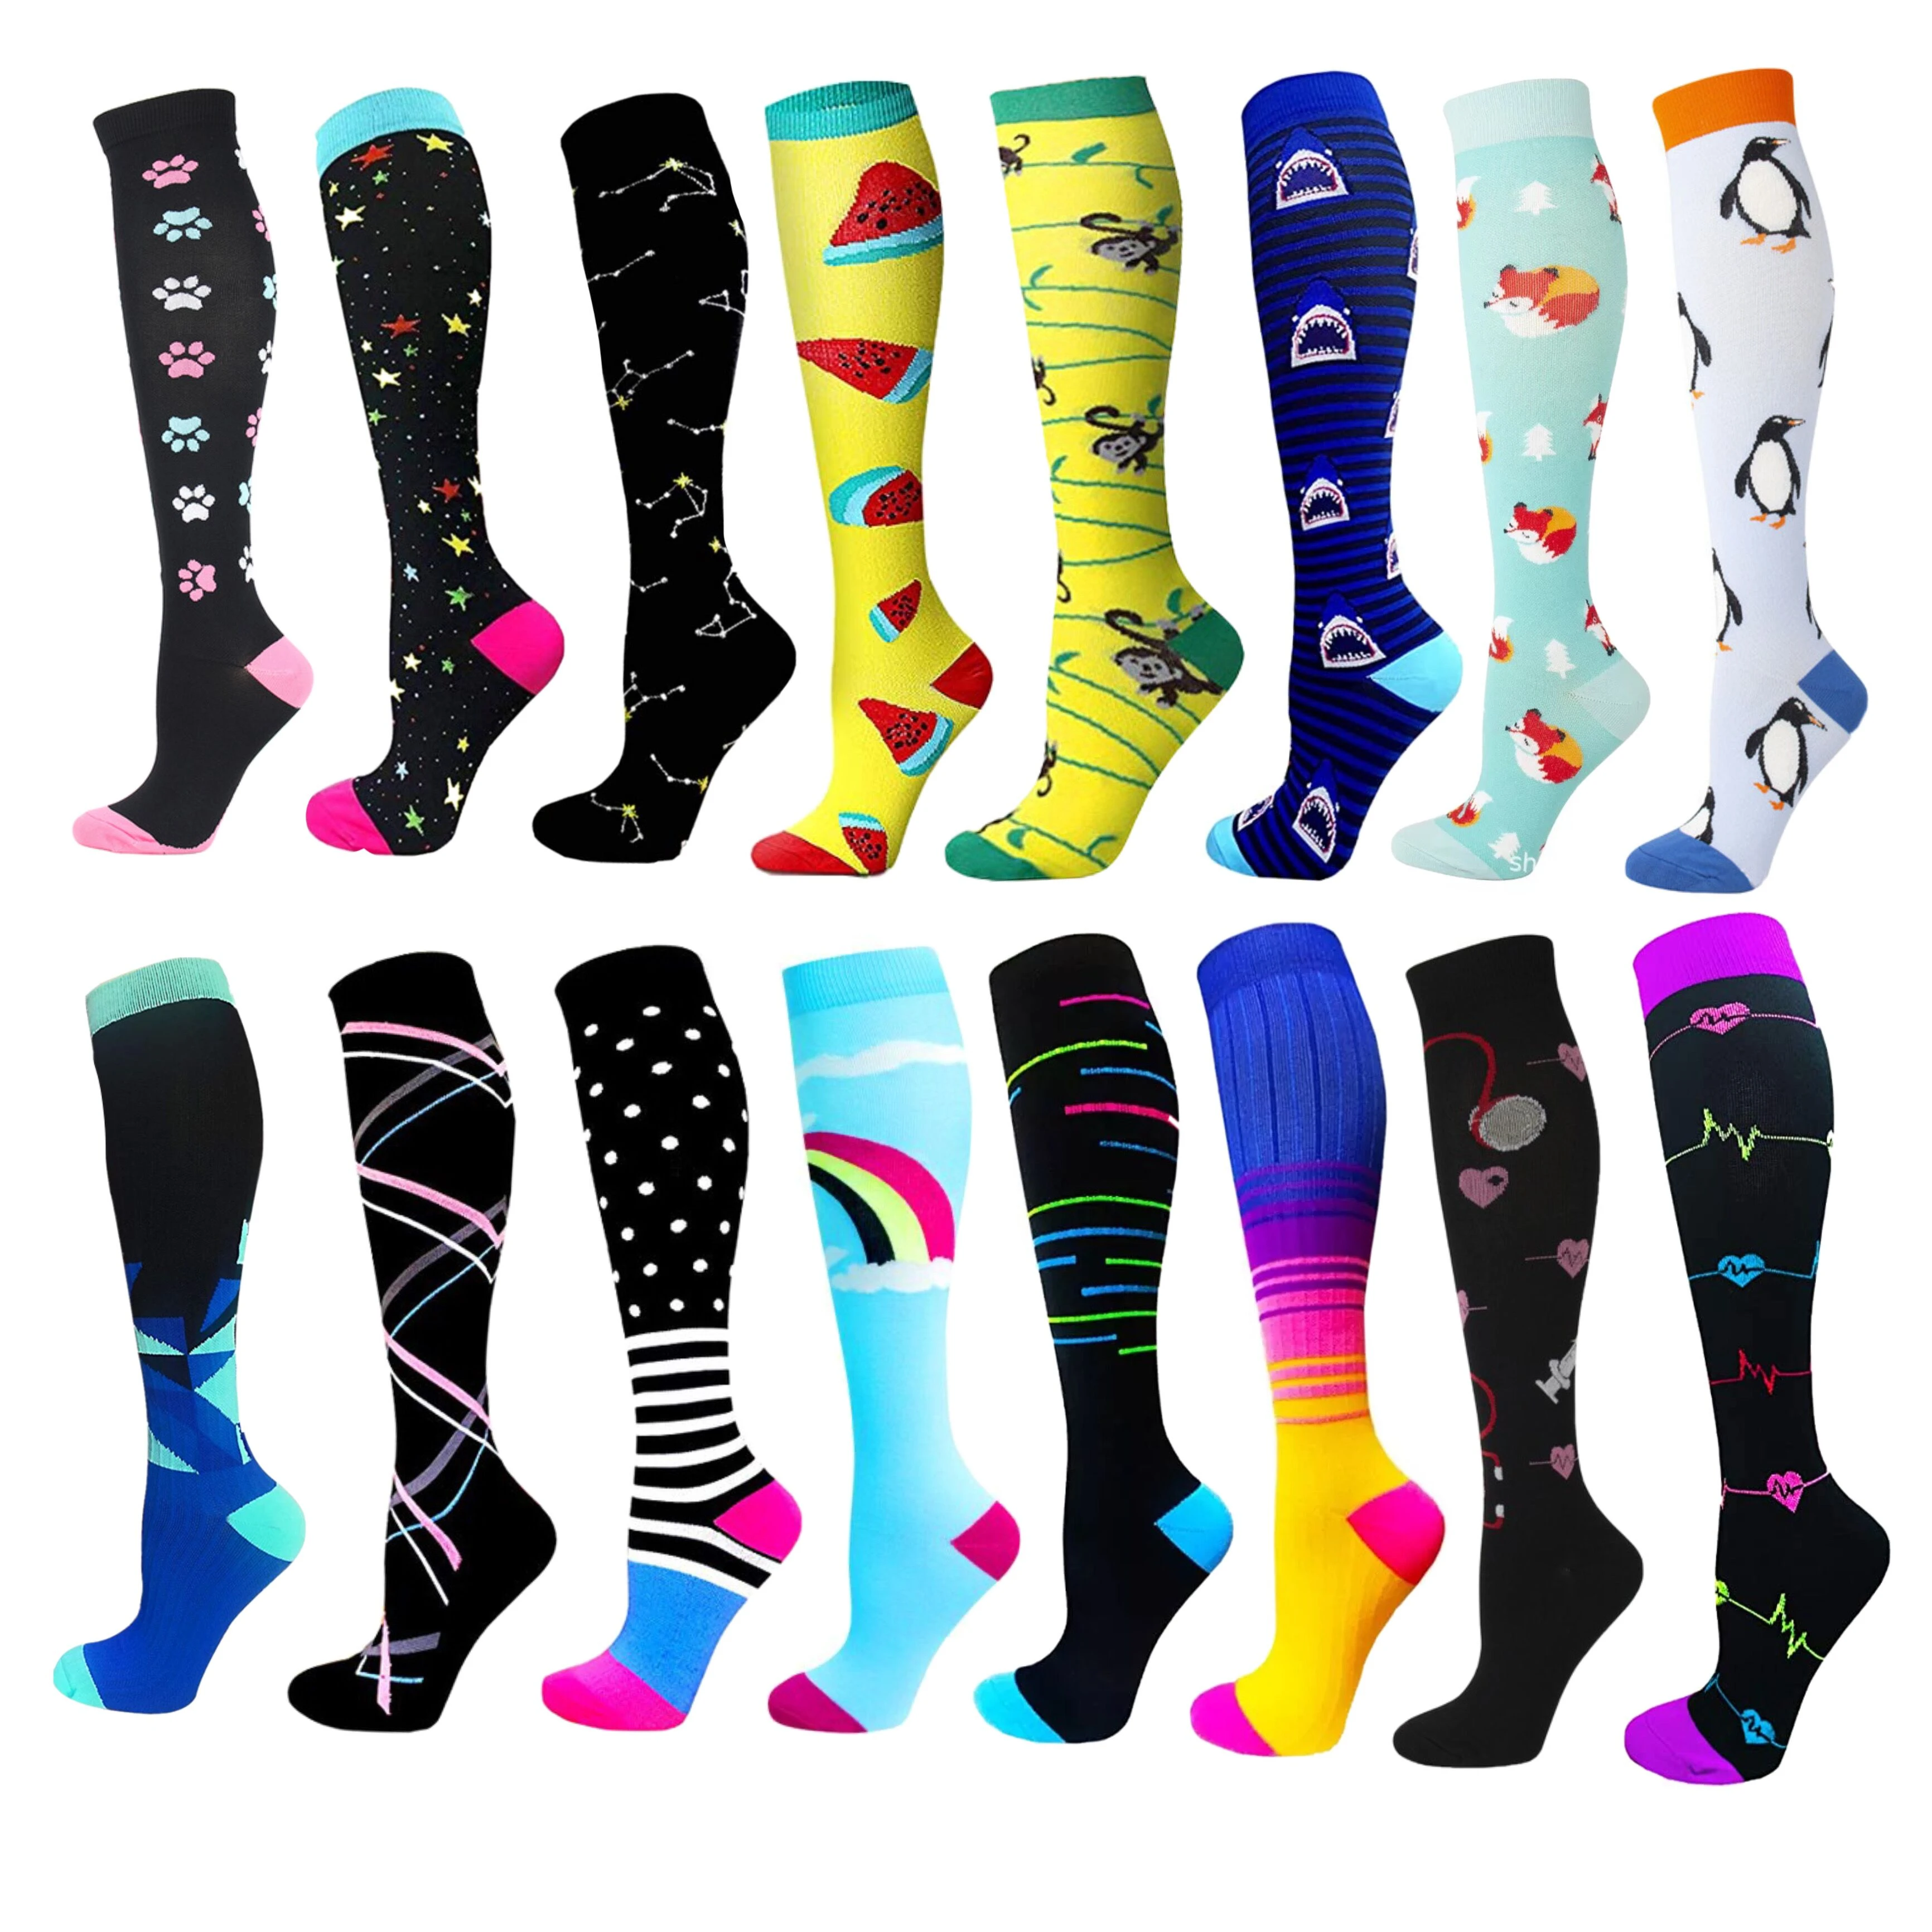 New Compression Socks For Varicose Veins Women's Funny Animal Cute Prints Socks Unisex Outdoor Running Cycling Socks For Nurses